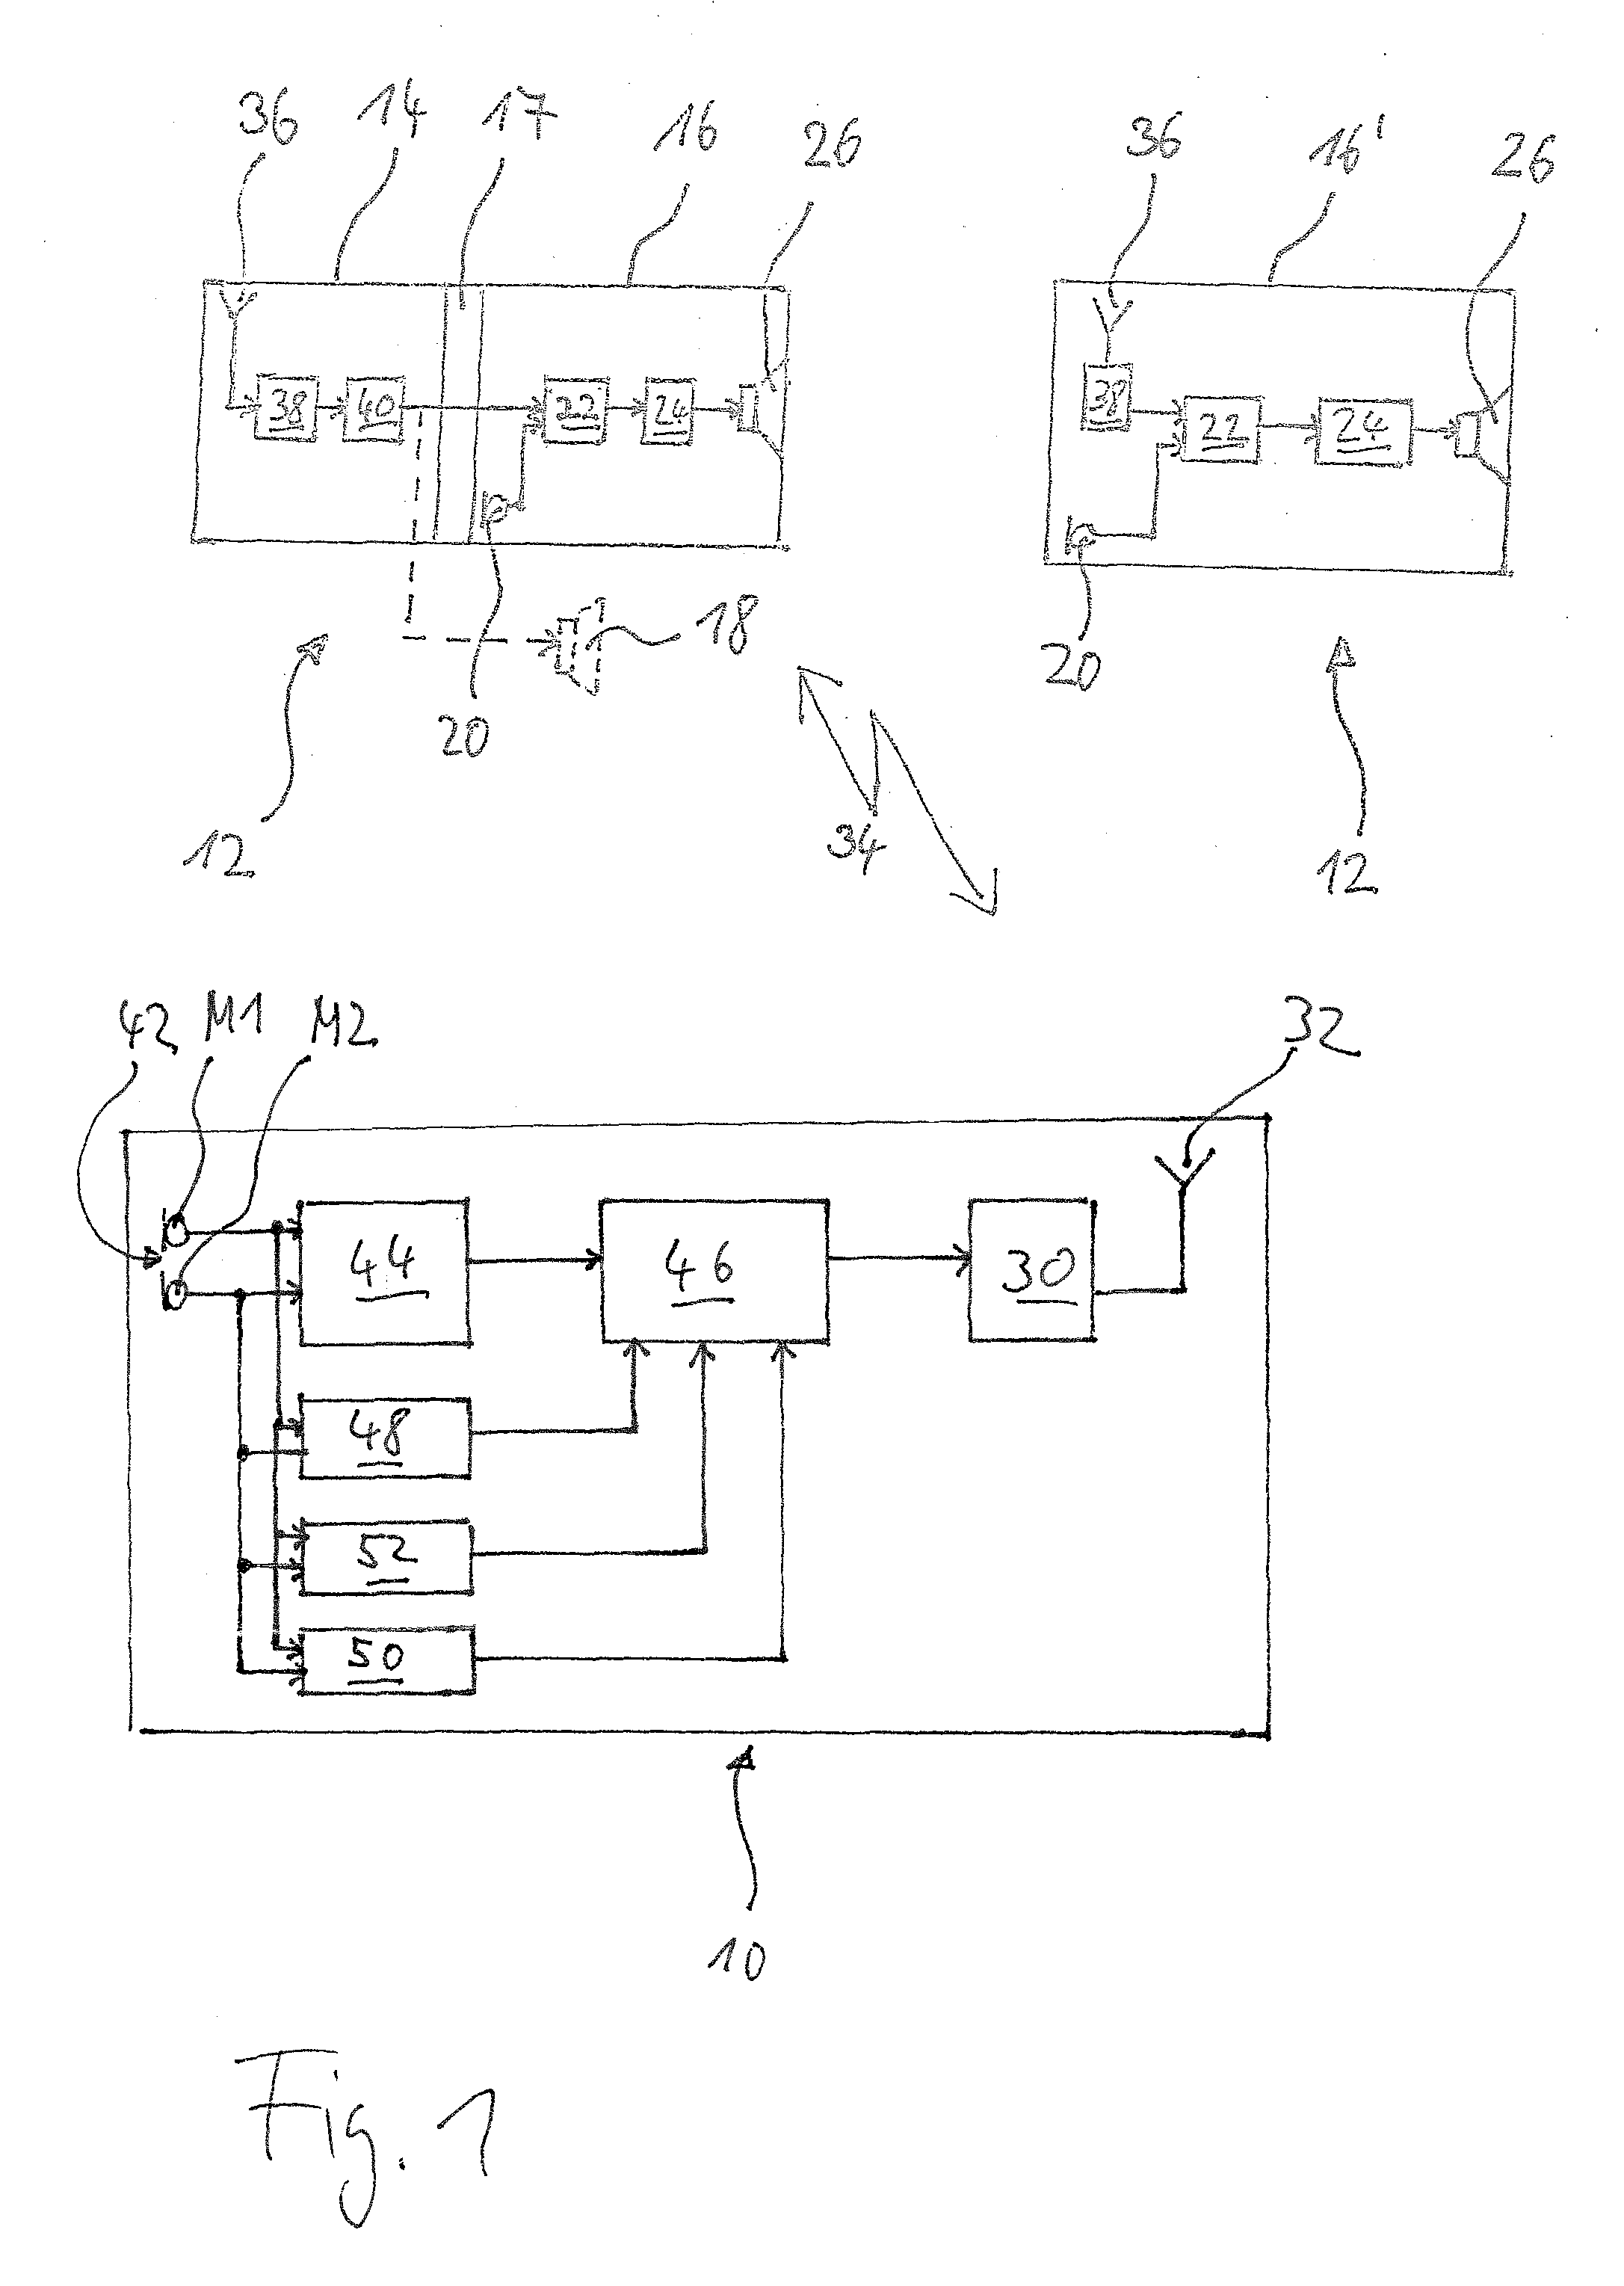 Method and system for providing hearing assistance to a user